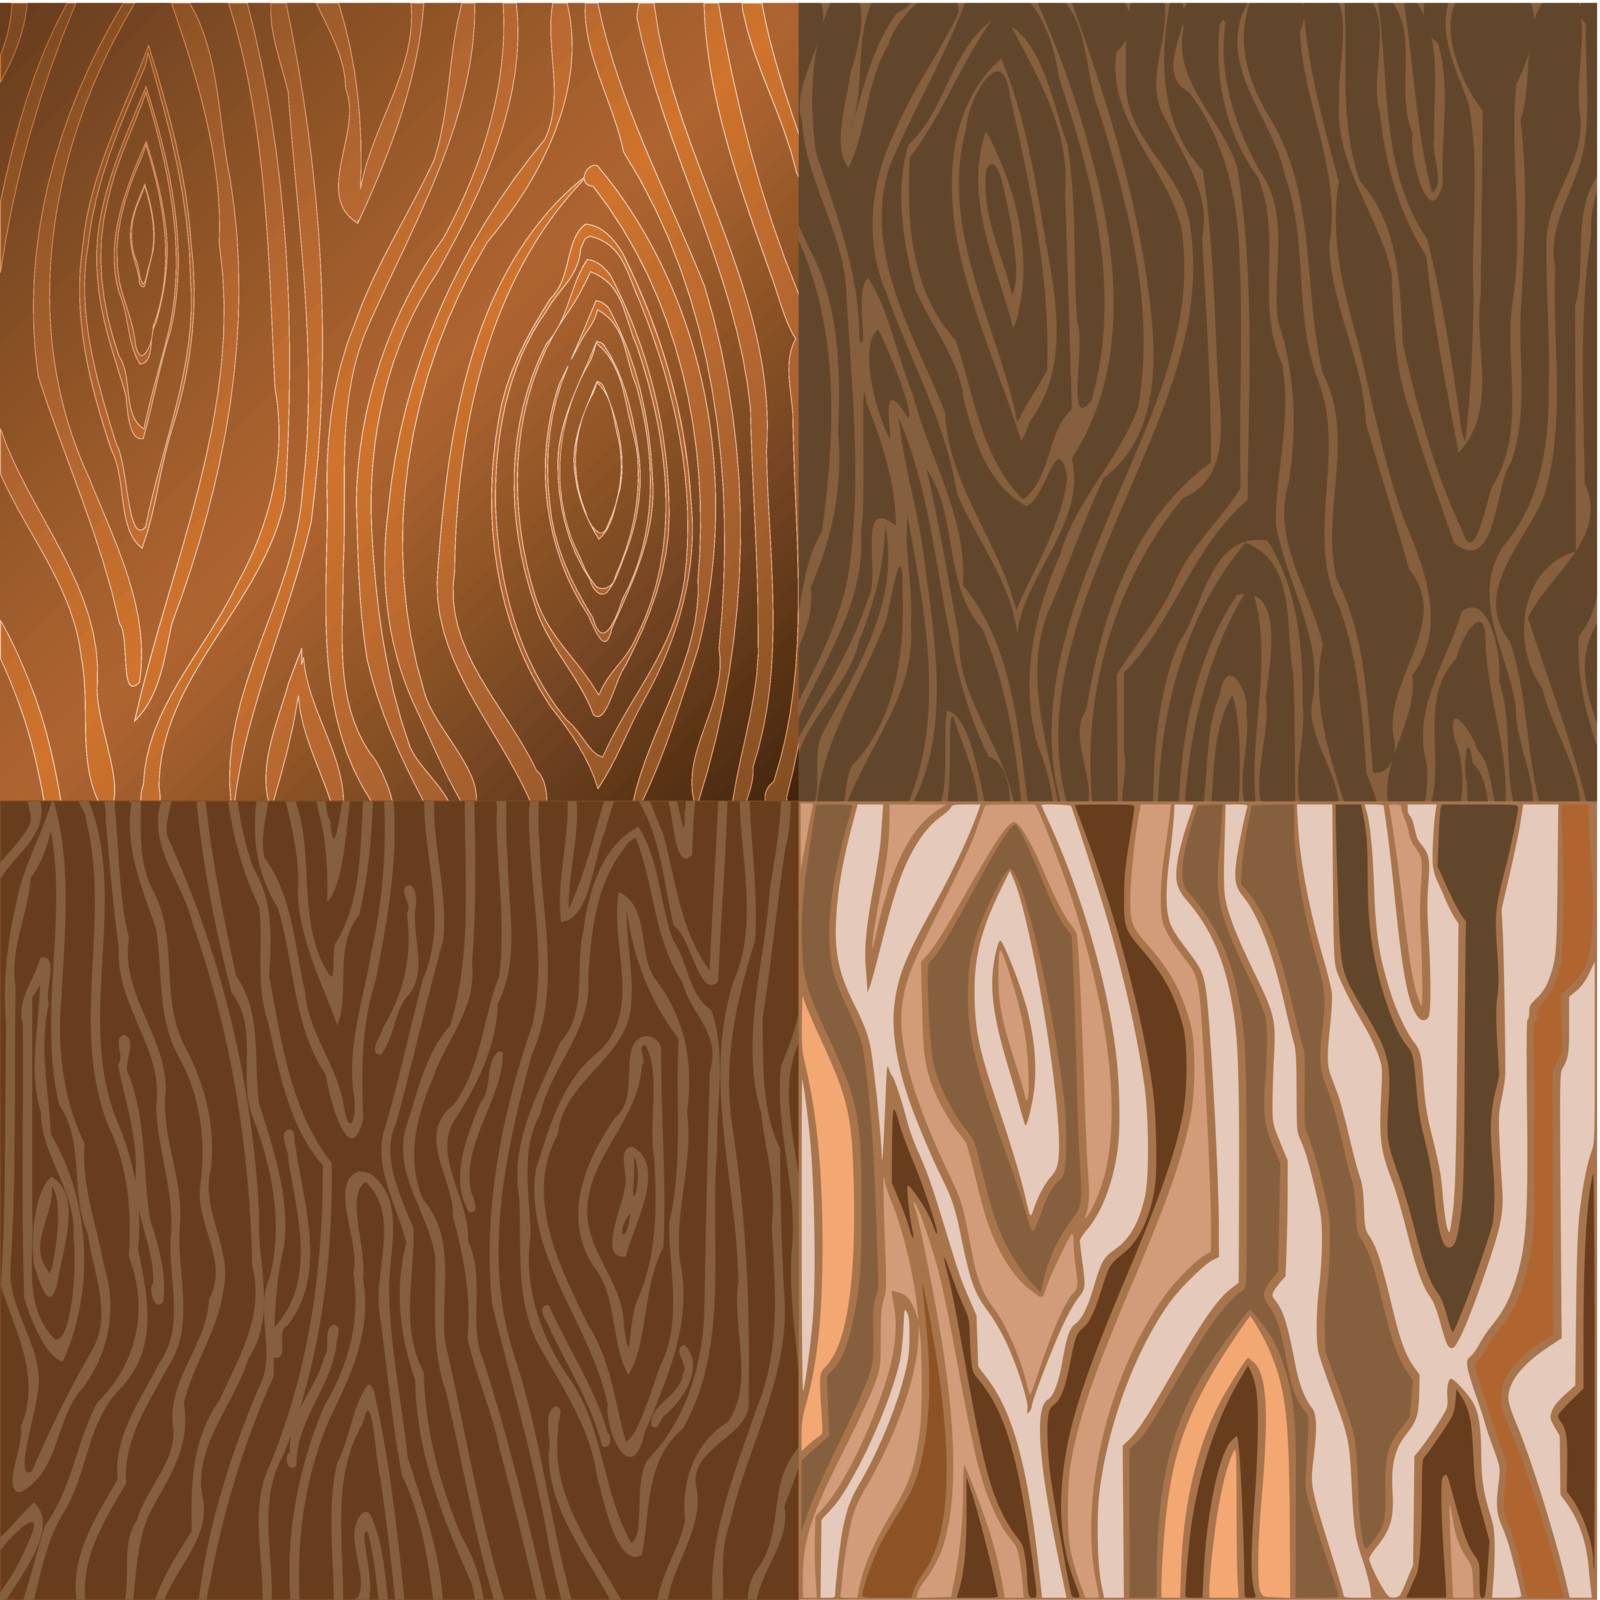  Set of vector illustrations of wooden texture